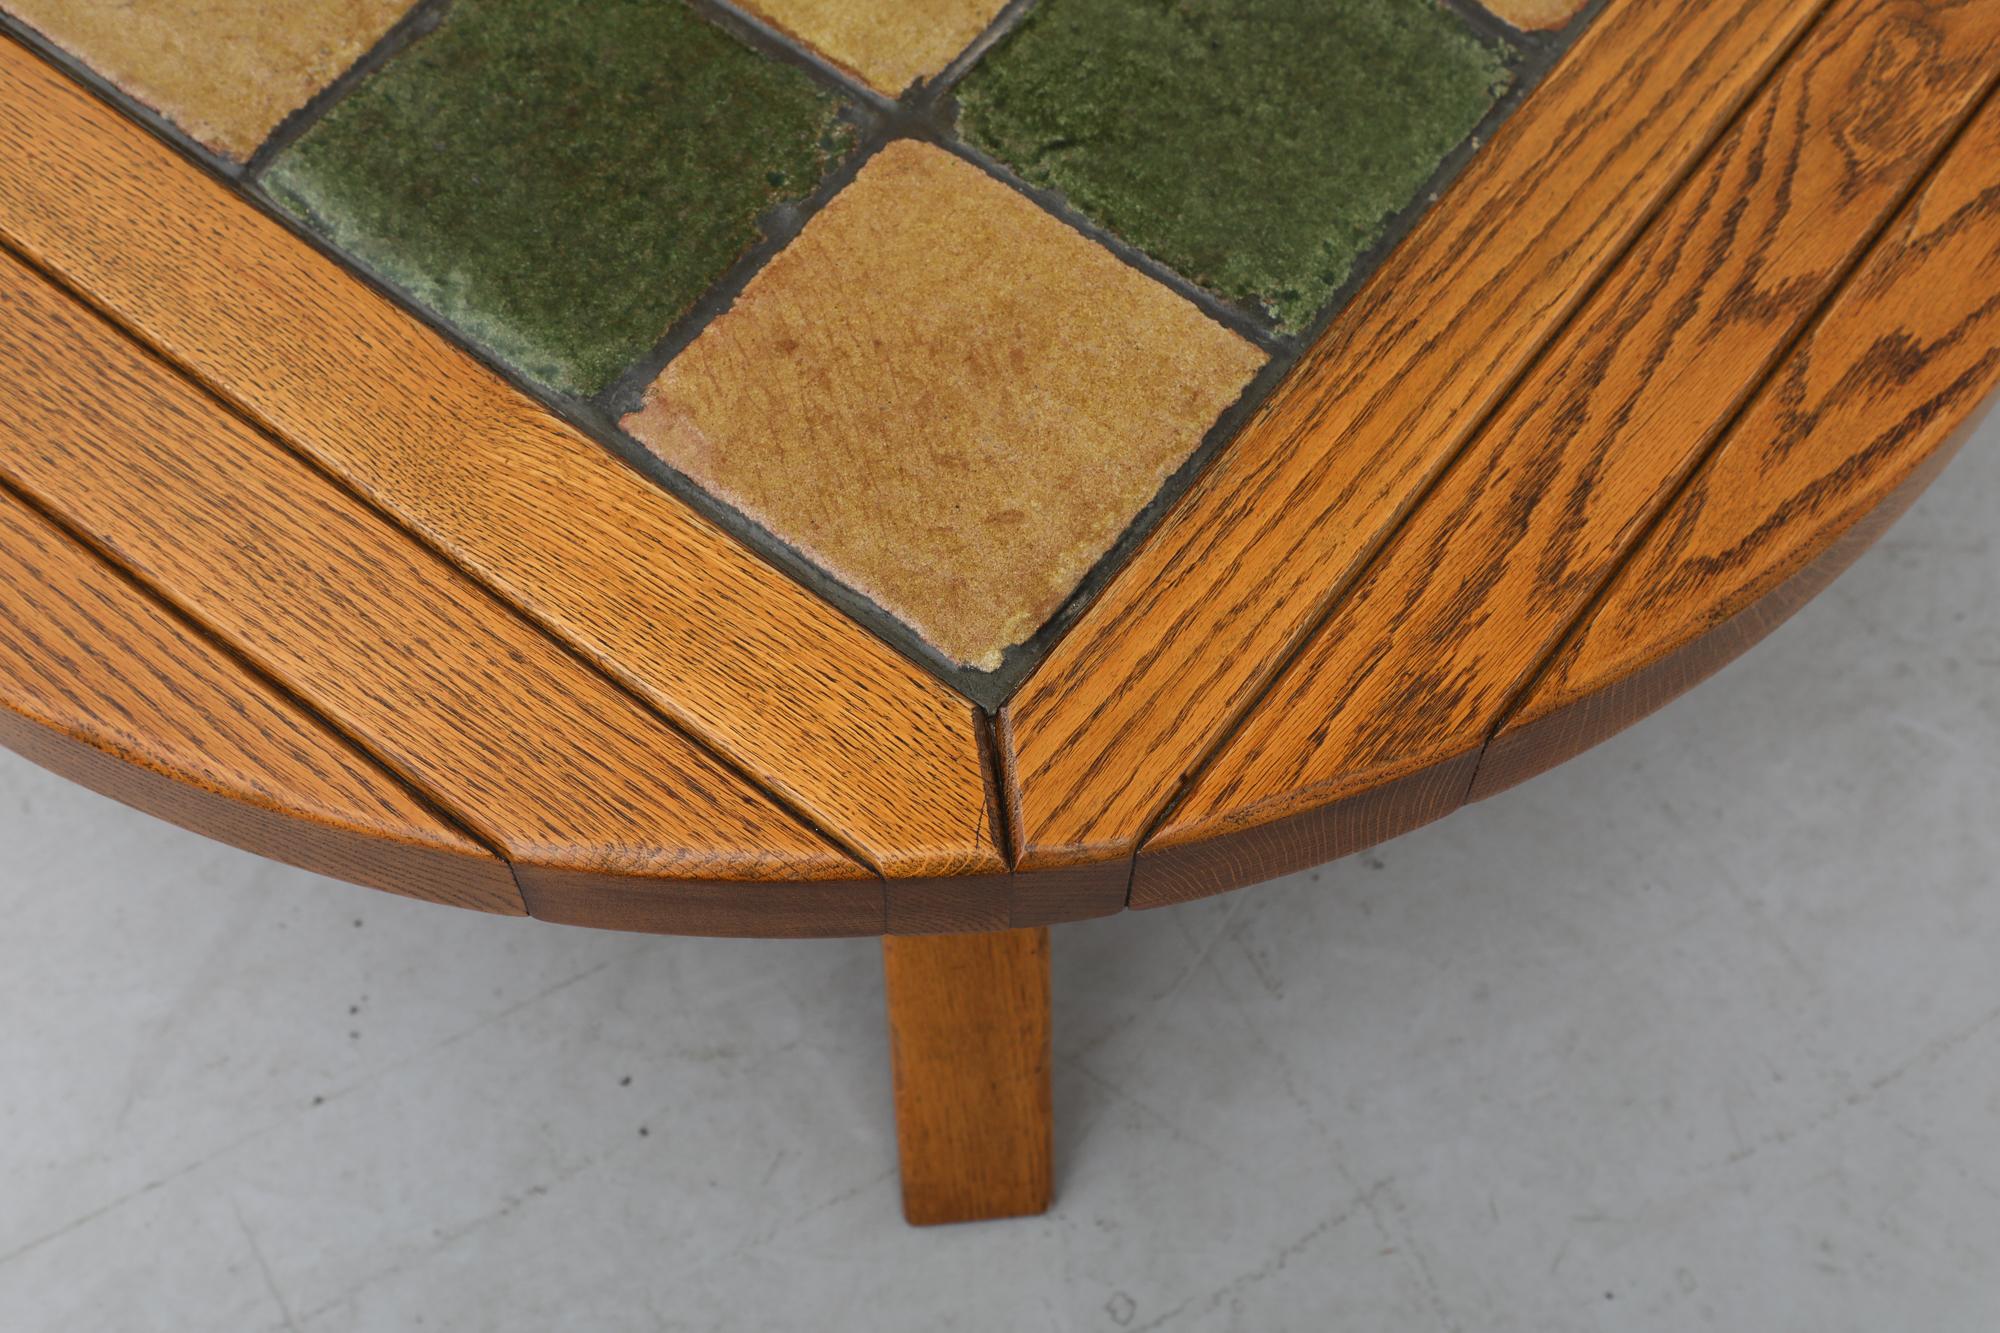 Ceramic Roger Capron Style Round Coffee Table with Tile Top